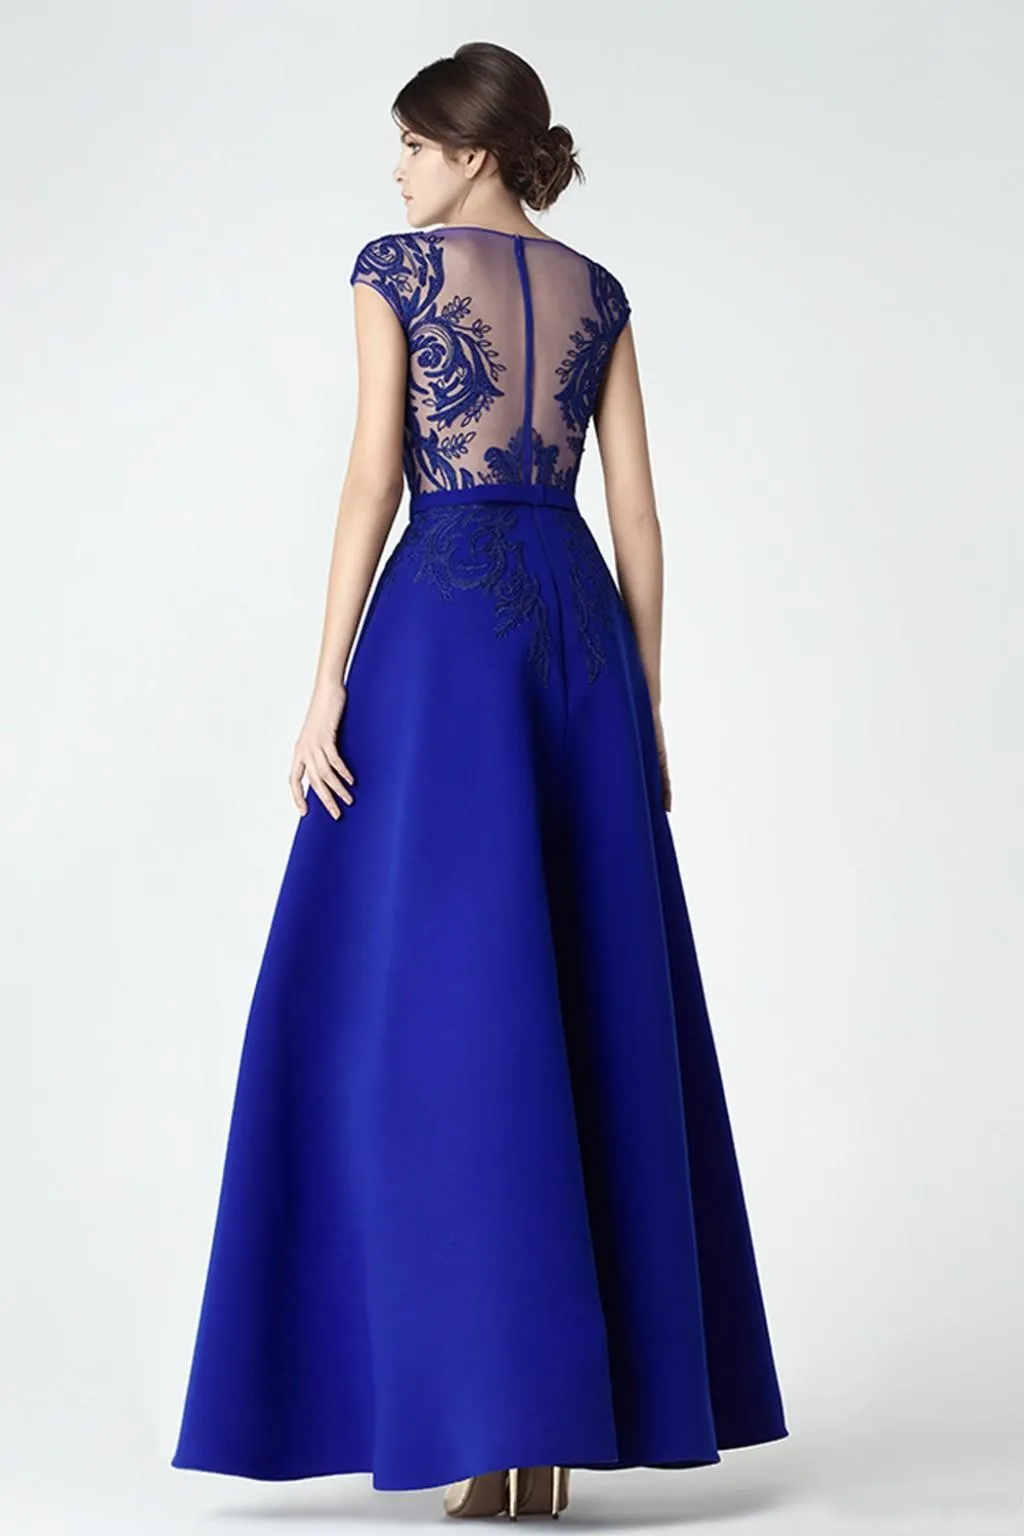 Royal Blue Prom Dress Long Capped SLeeve Iullsion Sexy Deisgn Sexy Party Gown Appliques Zipper Back Boat Neck High Low 2021 Prom Dress